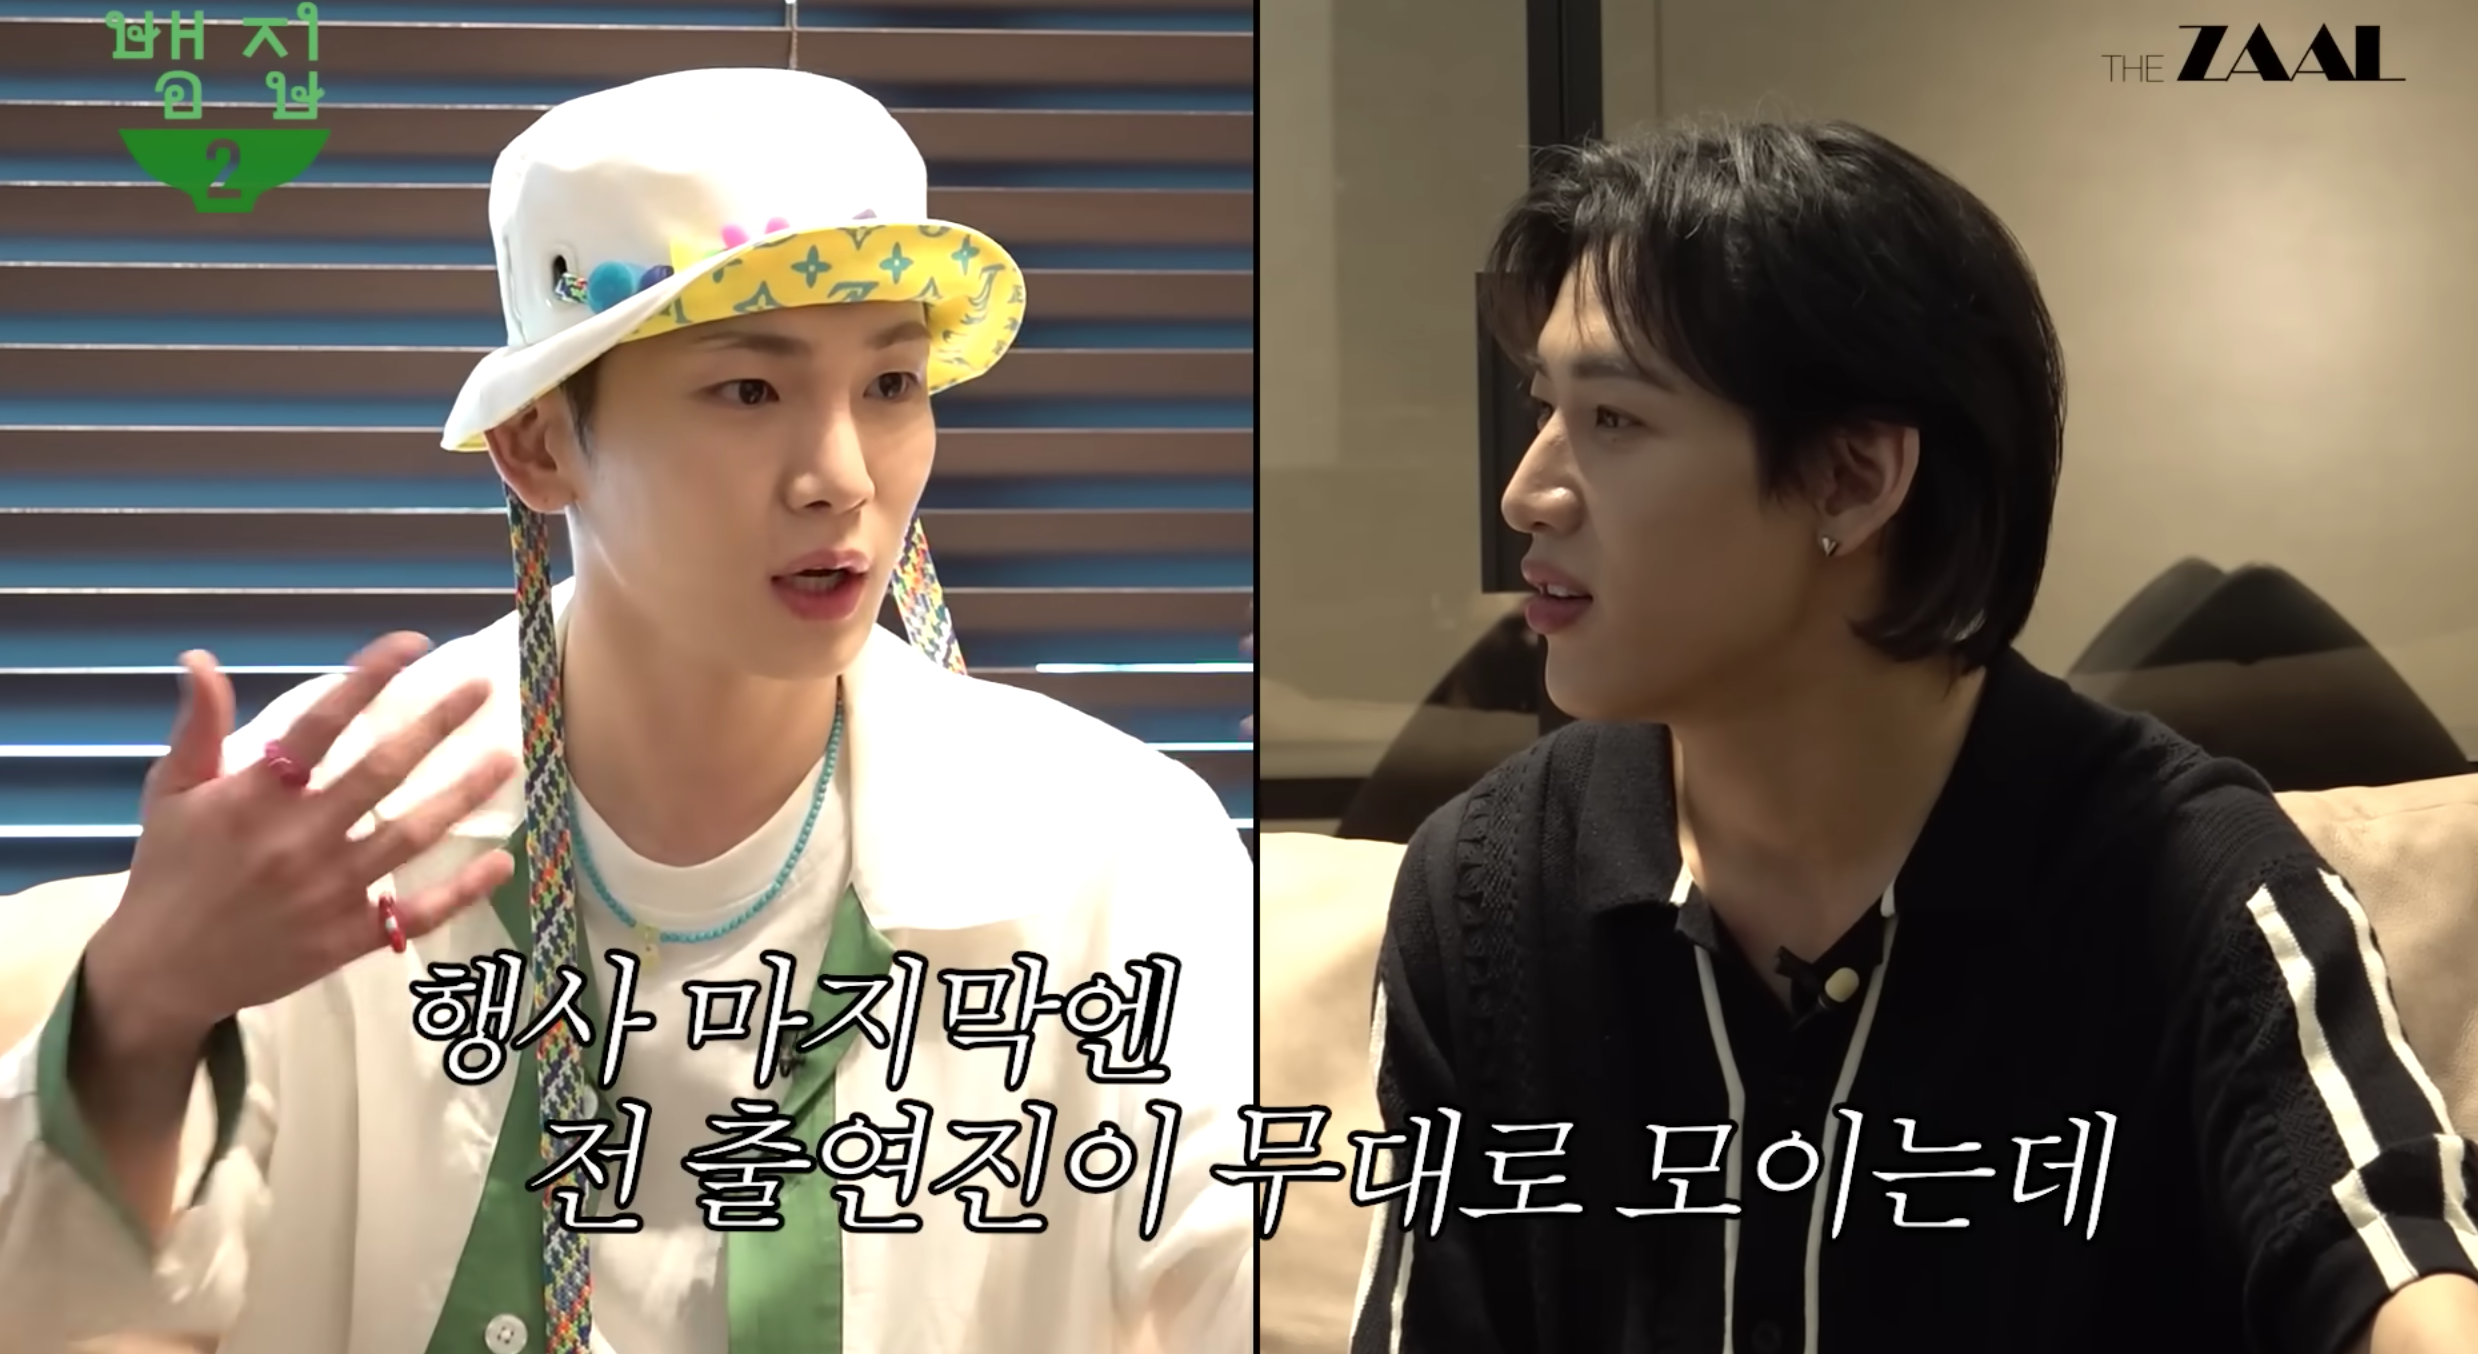 SHINee member Key made sure to give BamBam some awesome advice about inviting his celebrity idol to 'Bam House'!